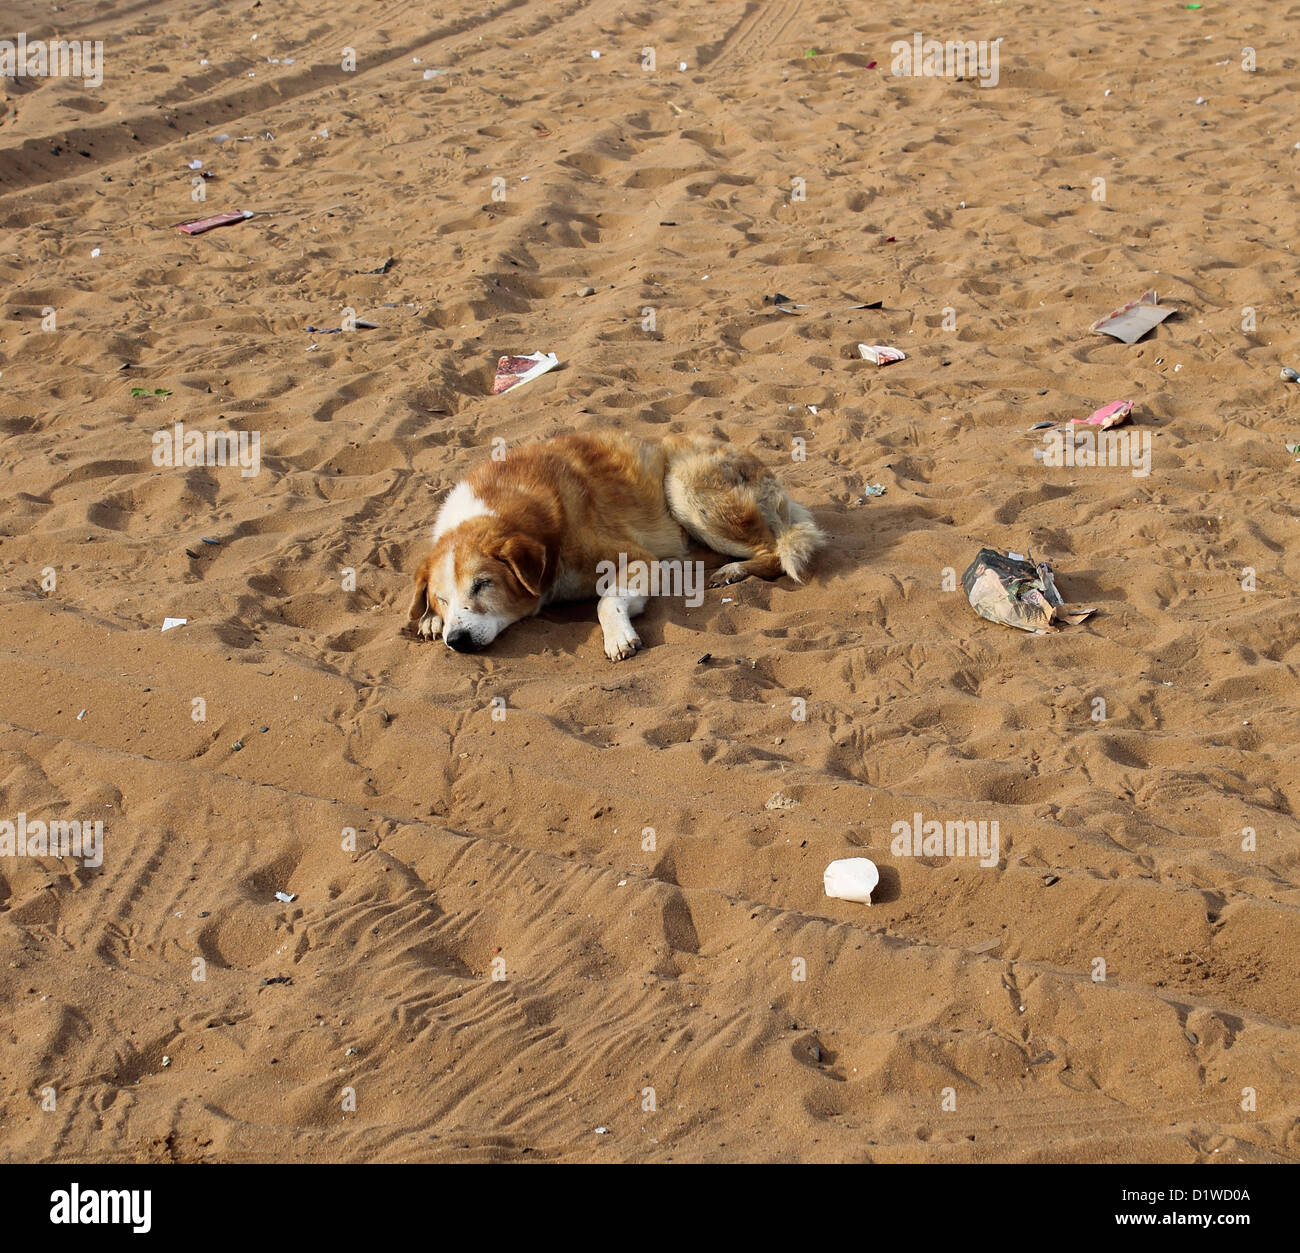 A street dog taking rest in a tourist beach in India Stock Photo